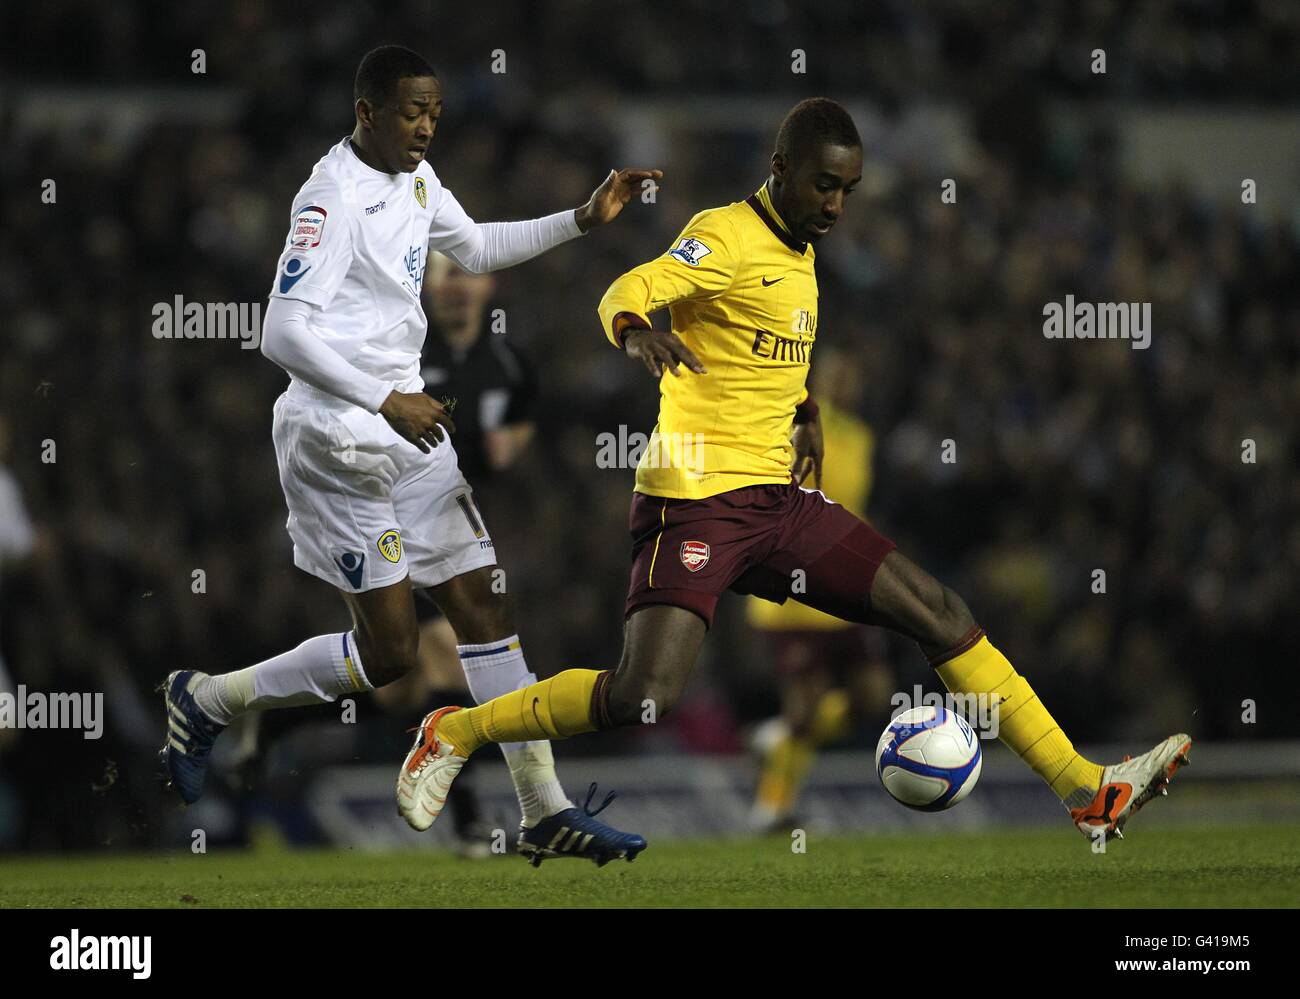 Soccer - FA Cup - Third Round Replay - Leeds United v Arsenal - Elland Road. Leeds United's Sanchez Watt (left) and Arsenal's Johan Djourou battle for the ball Stock Photo